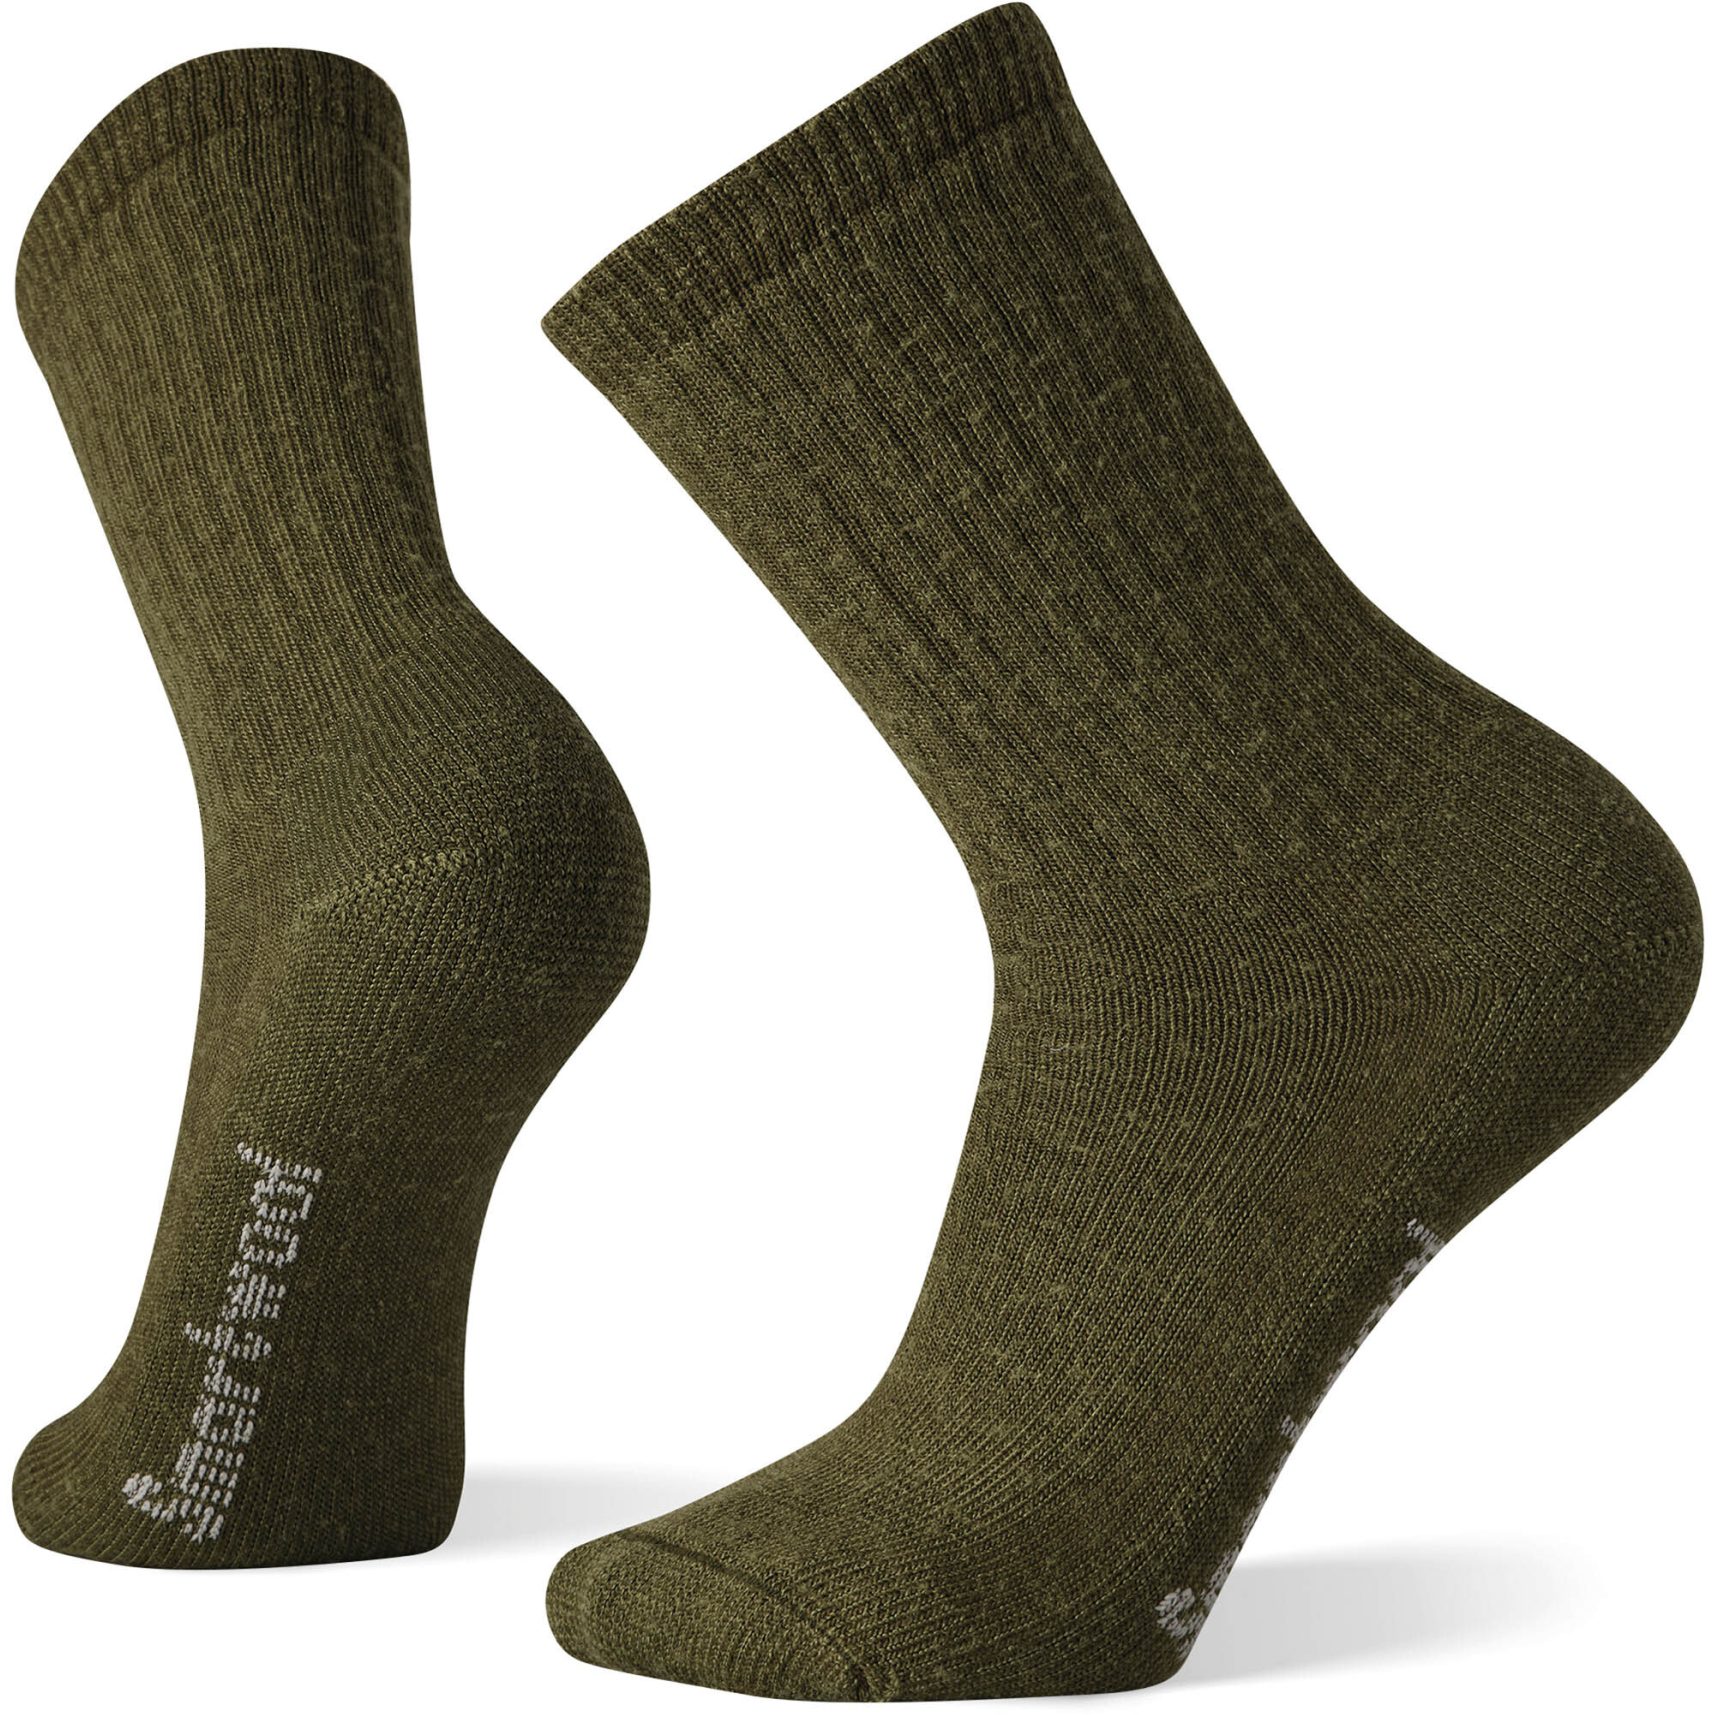 Productfoto van SmartWool Classic Edition Full Cushion Solid Crew Wandelsokken - D11 military olive